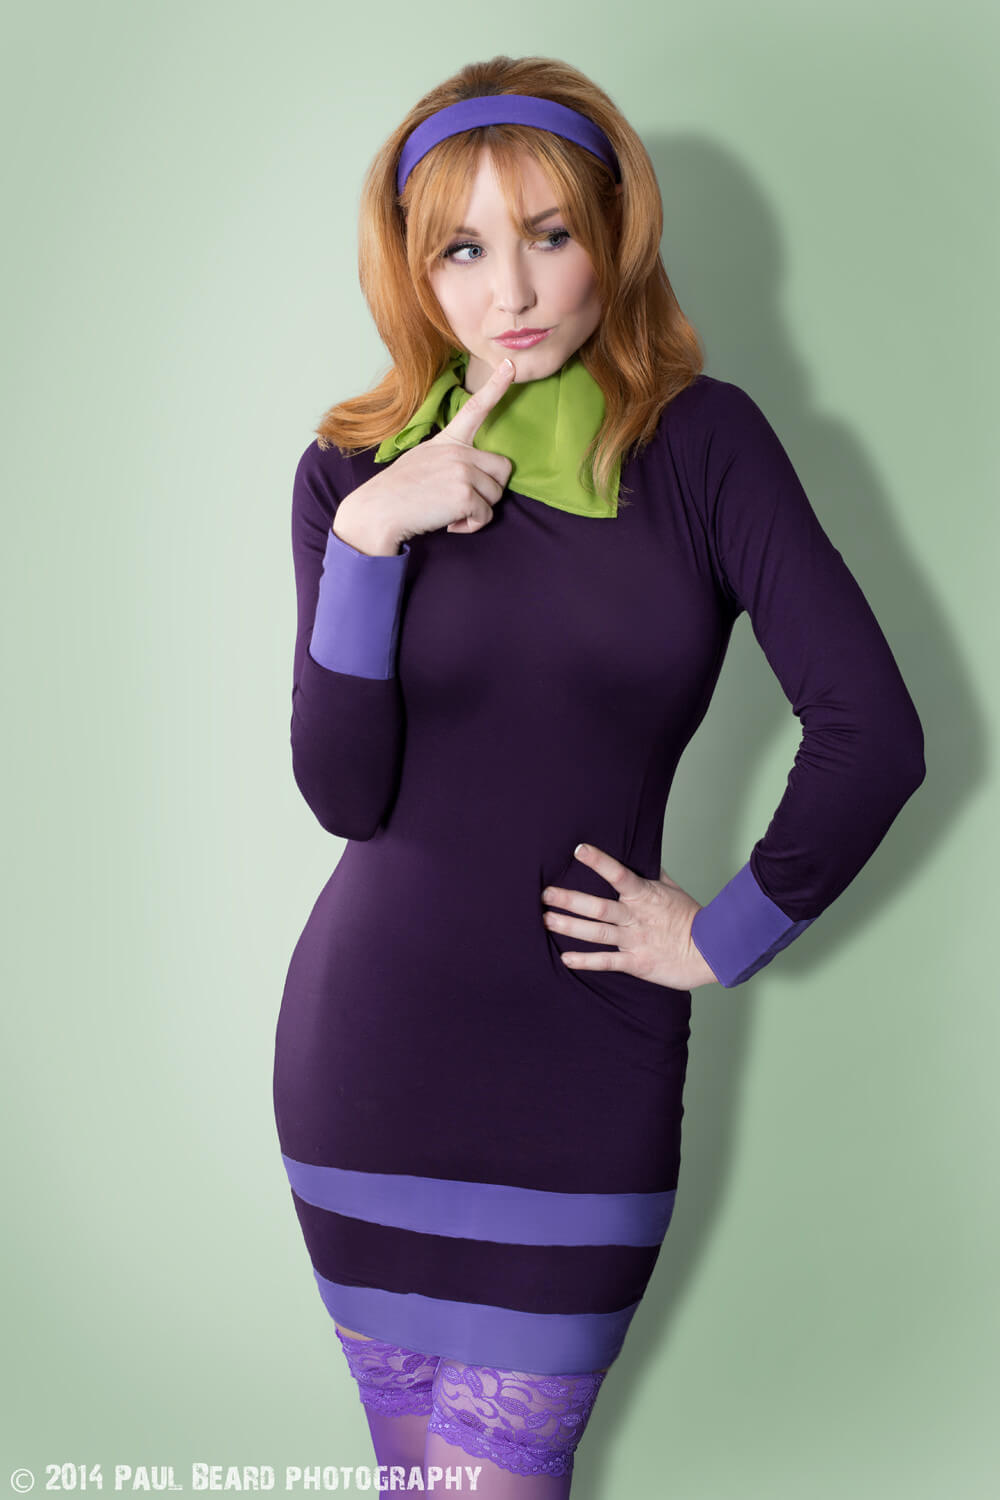 70+ Hot Pictures Of Daphne Blake From Scooby Doo Which Are Sure to Catch Your Attention 91